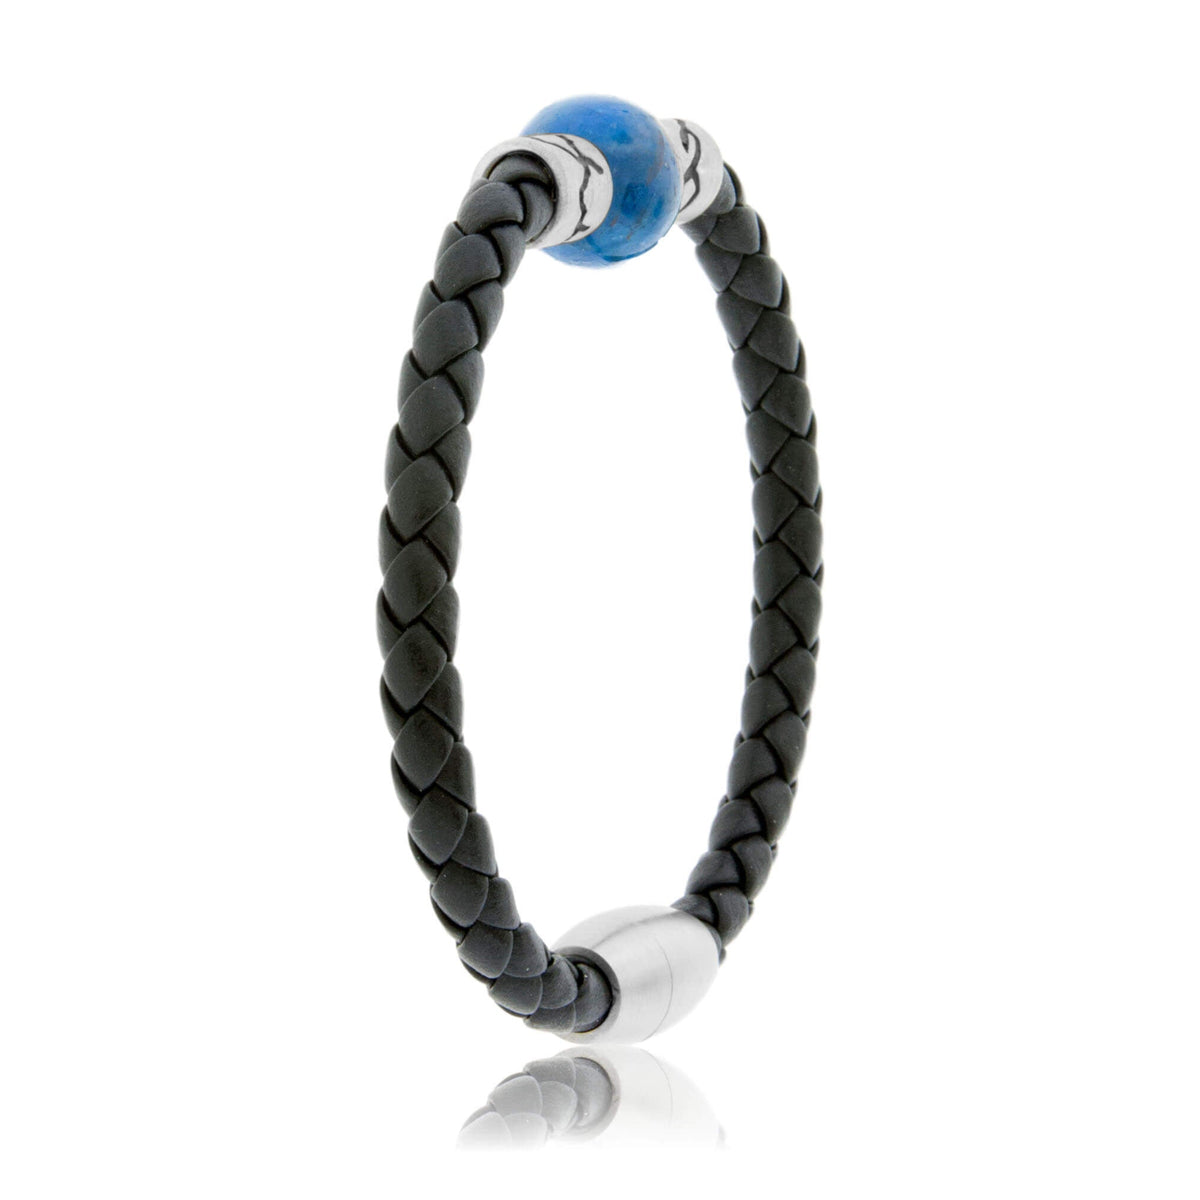 Apatite & Mountain Bead on Woven Leather Sterling Silver Bracelet - Park City Jewelers